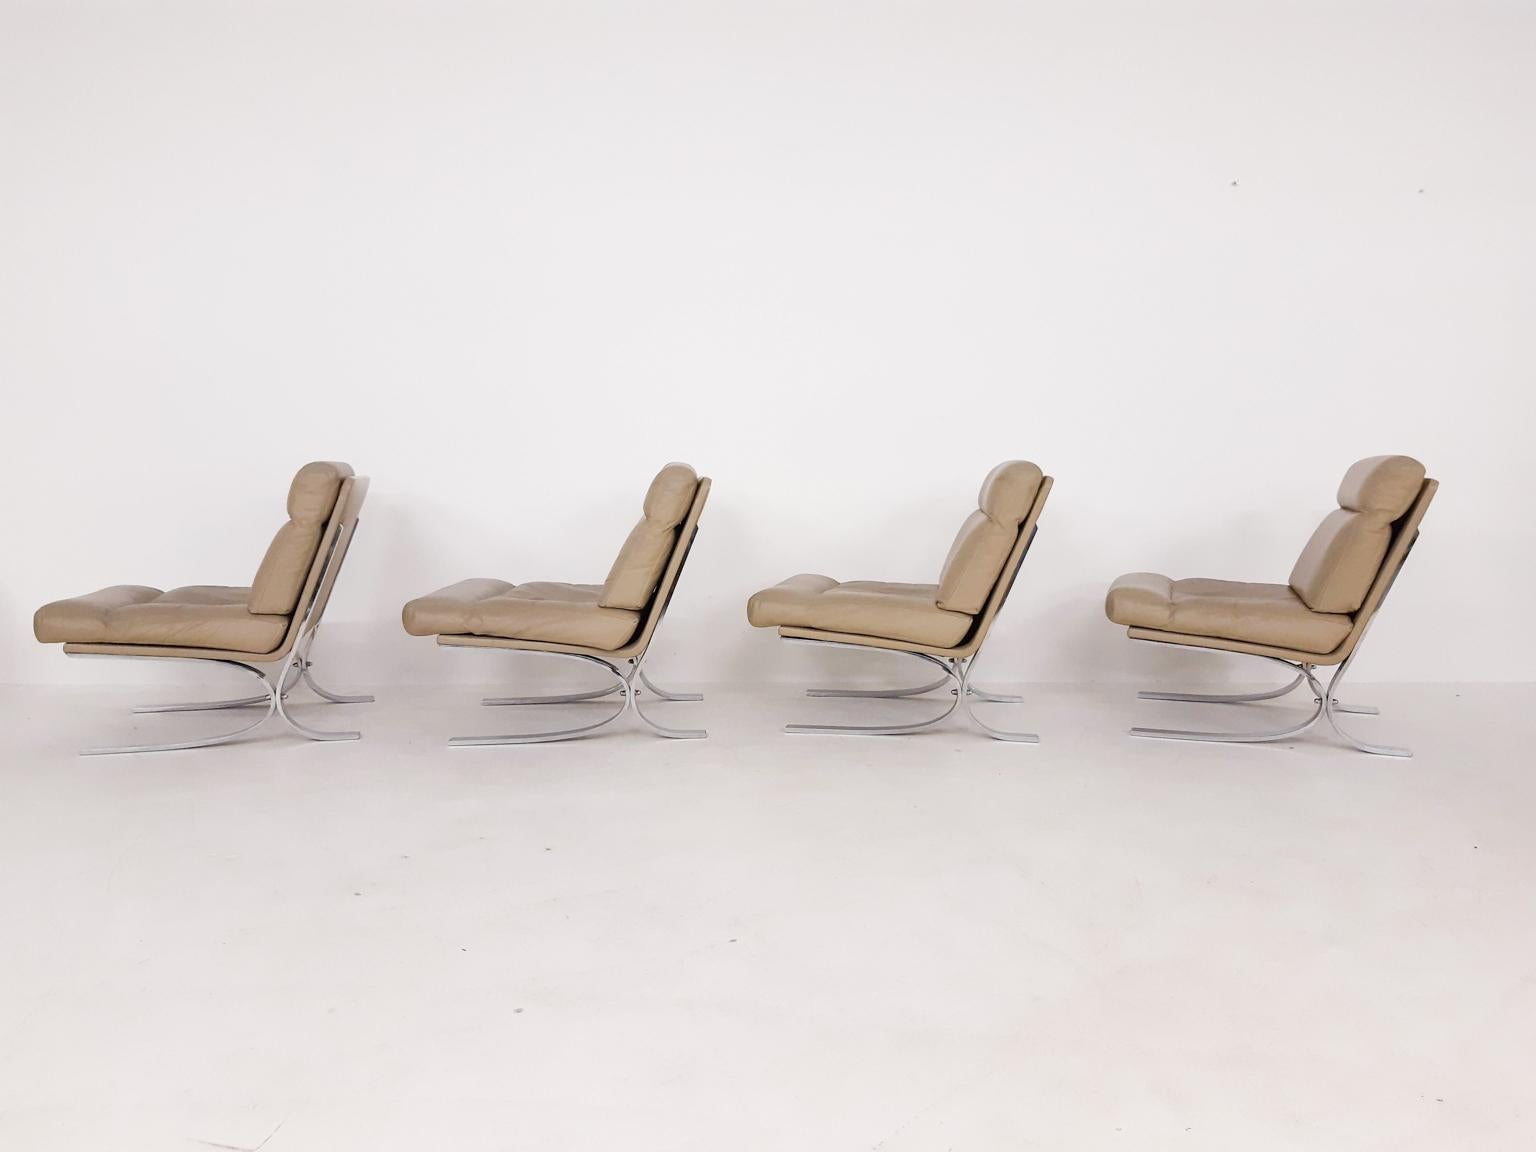 Set of four high quality chromed metal lounge chairs with an off-white or beige leather upholstery.

We think they are designed by Paul Tuttle for Strässle, Switzerland. They chairs are very similar in design to his 